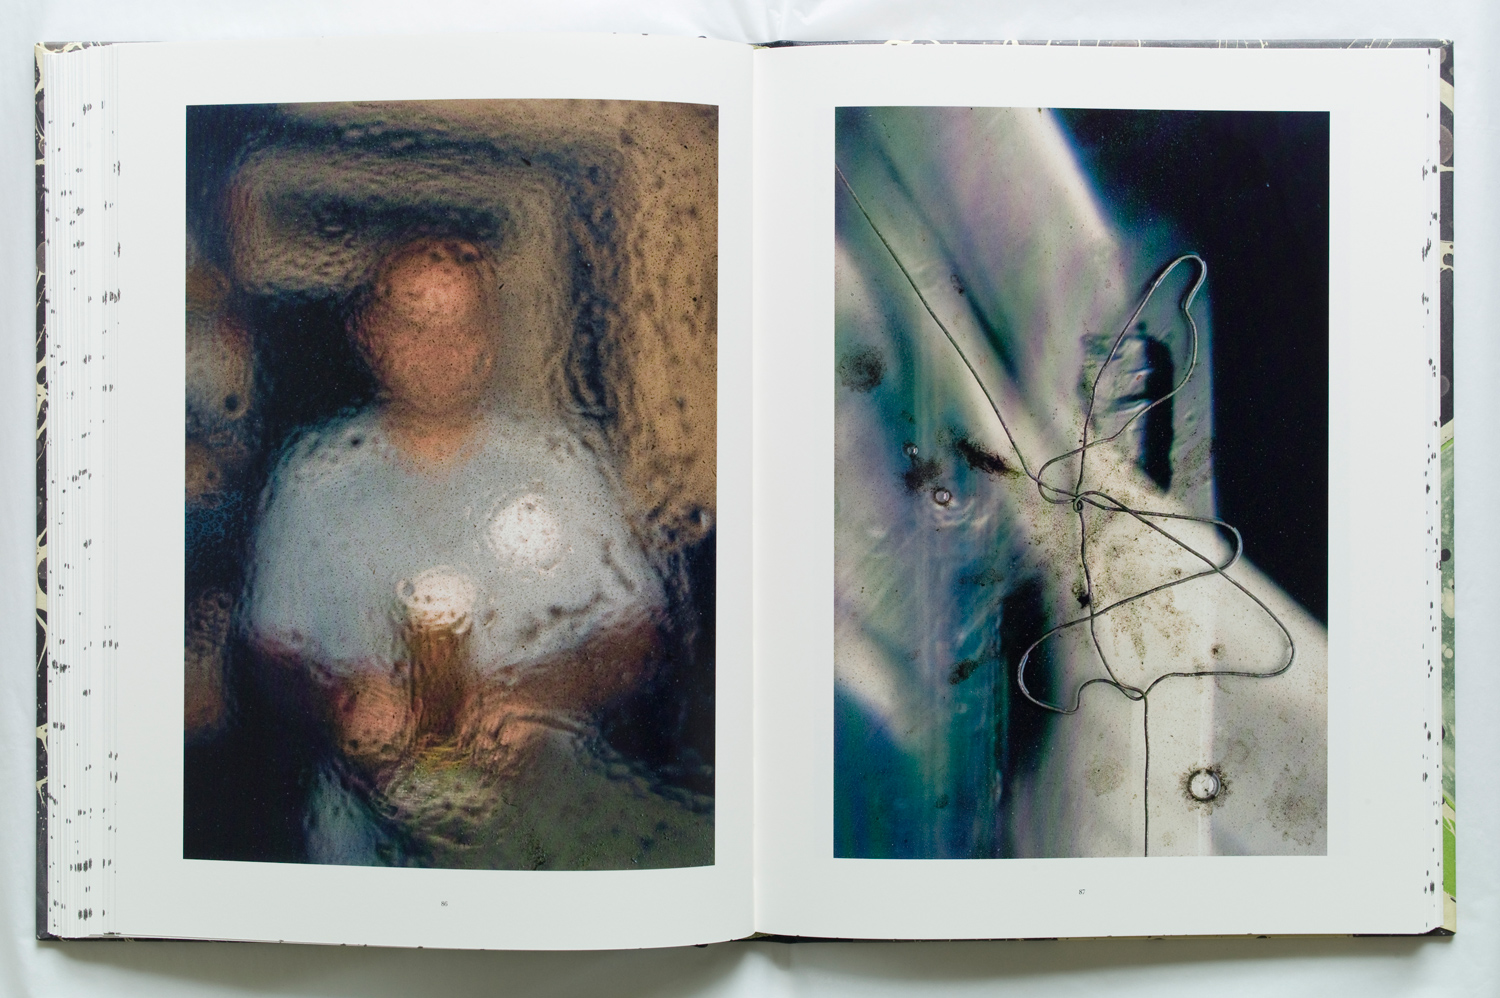 Pages are from Stephen Gill's latest book Coexistence.